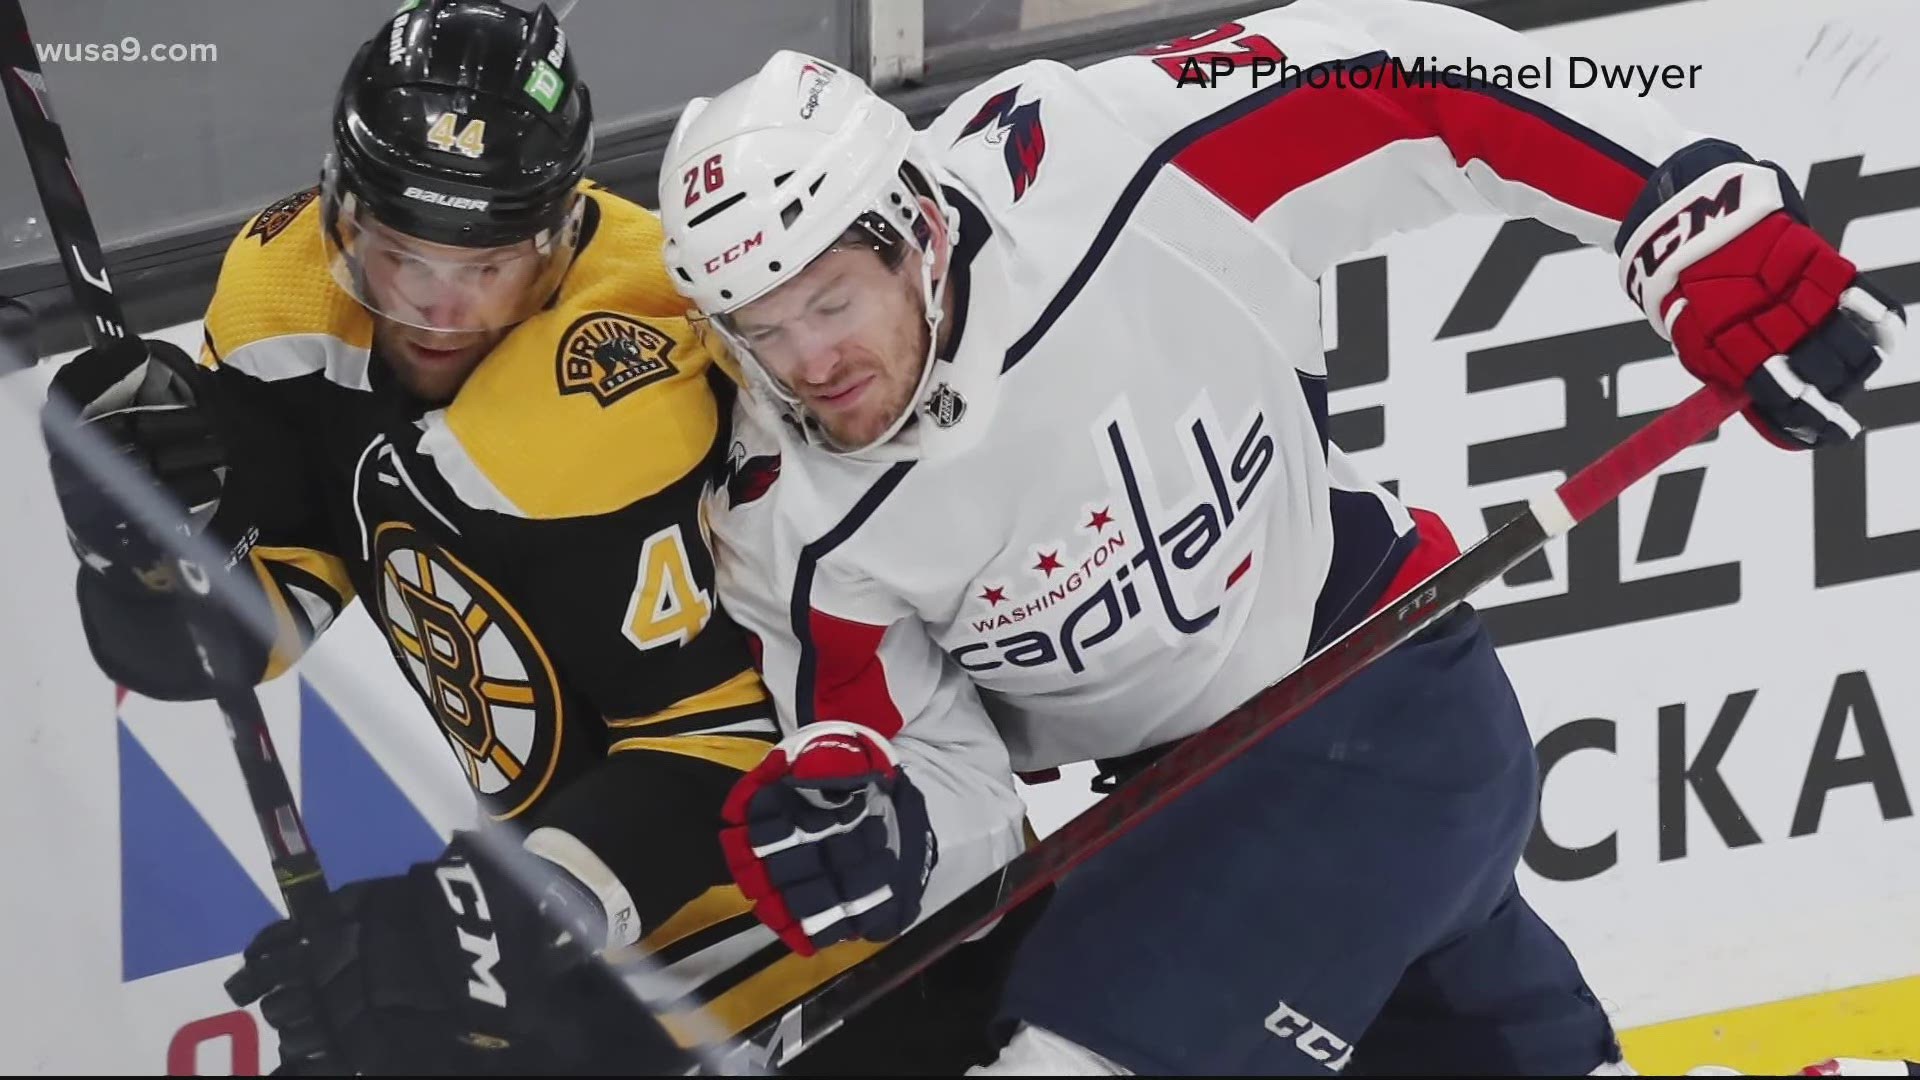 The Washington Capitals will take on the Boston Bruins in Game 1 on Saturday.